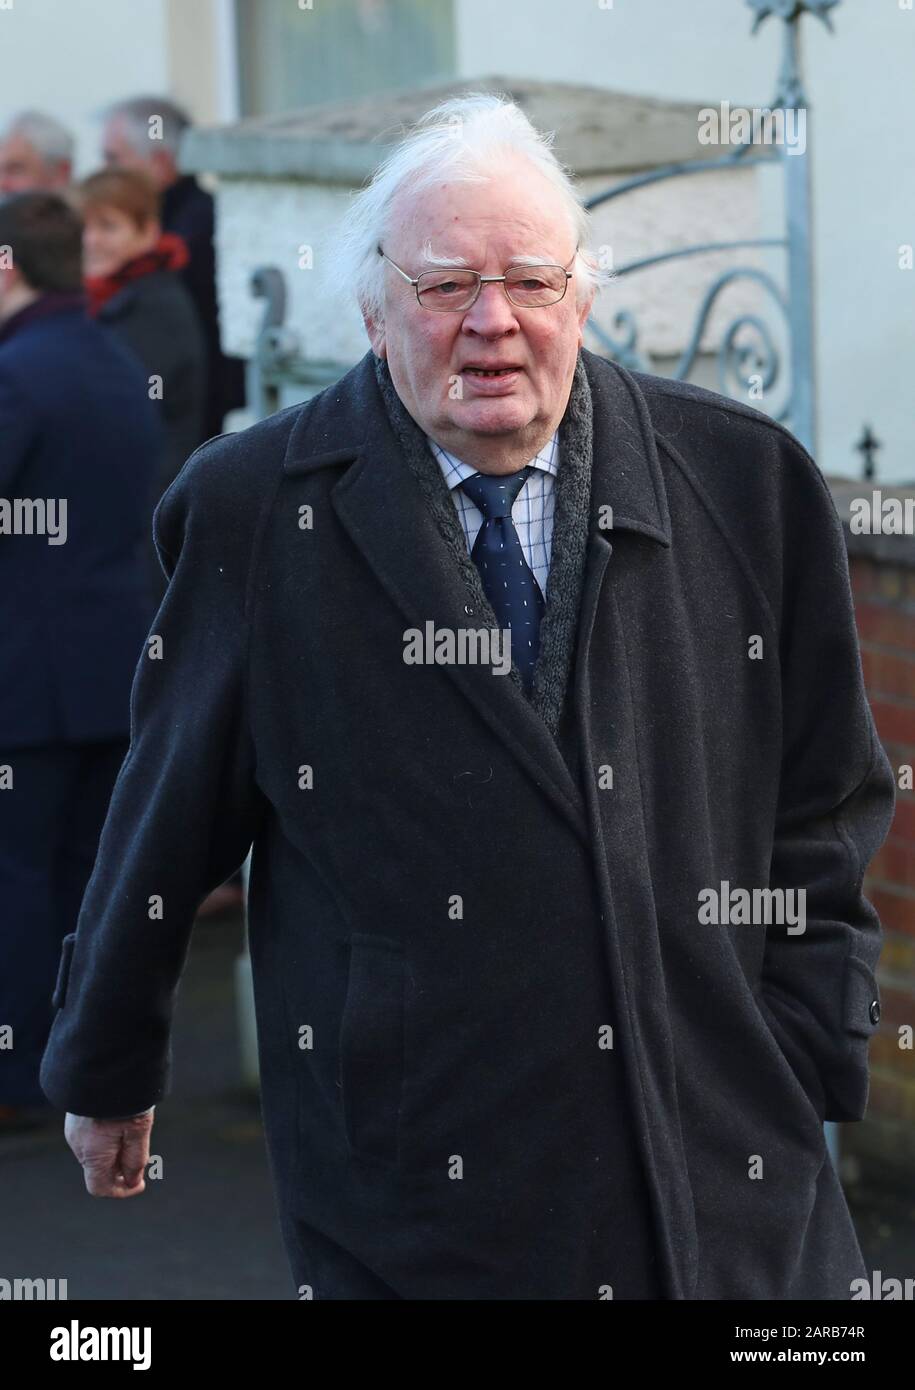 Austin Currie Attends The Funeral Of Seamus Mallon The Former Deputy First Minister Of Northern